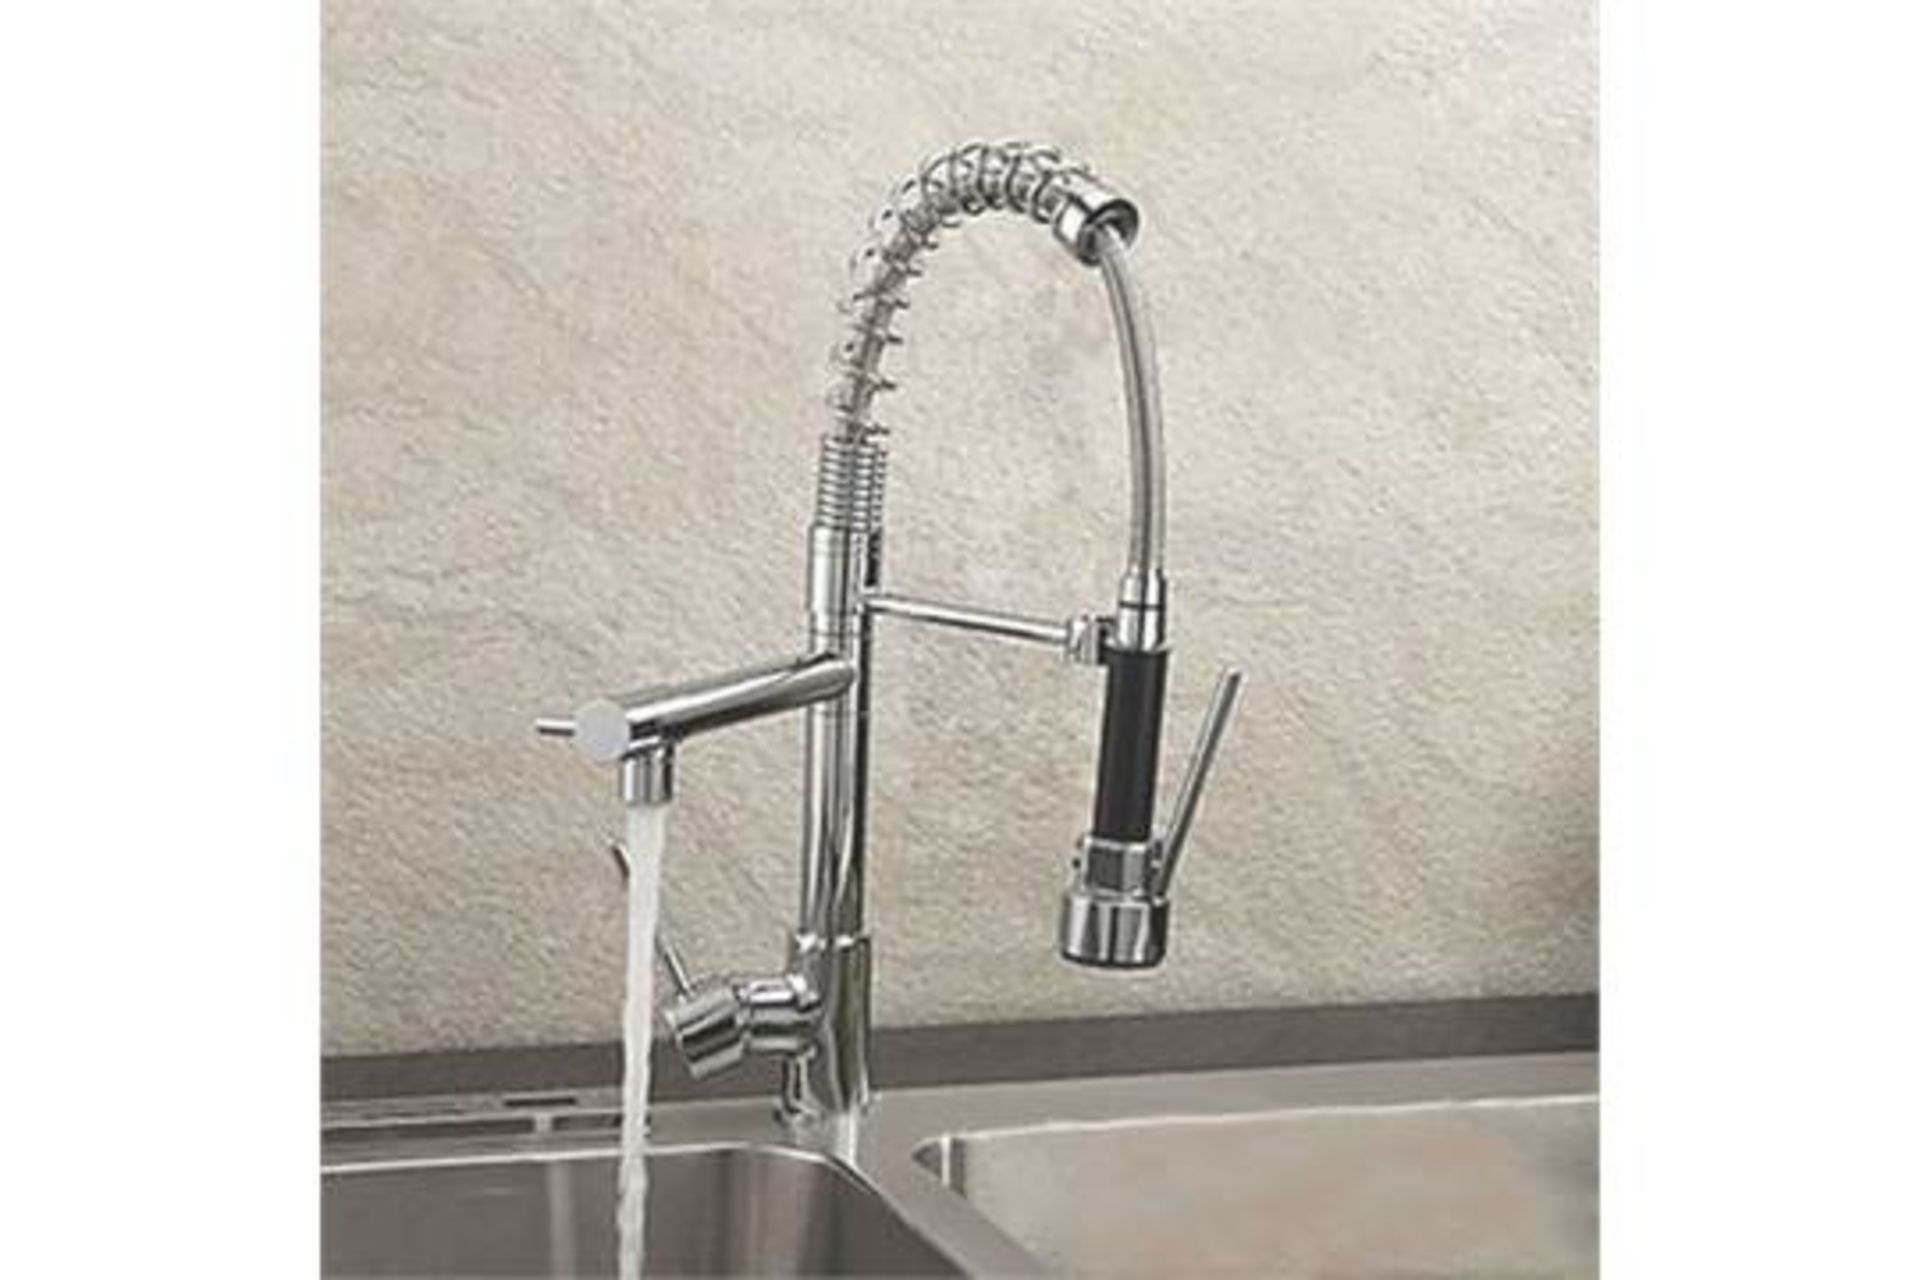 New Bentley Modern Monobloc Chrome Brass Pull Out Spray Mixer Tap.RRP £349.99.This Tap Is From...